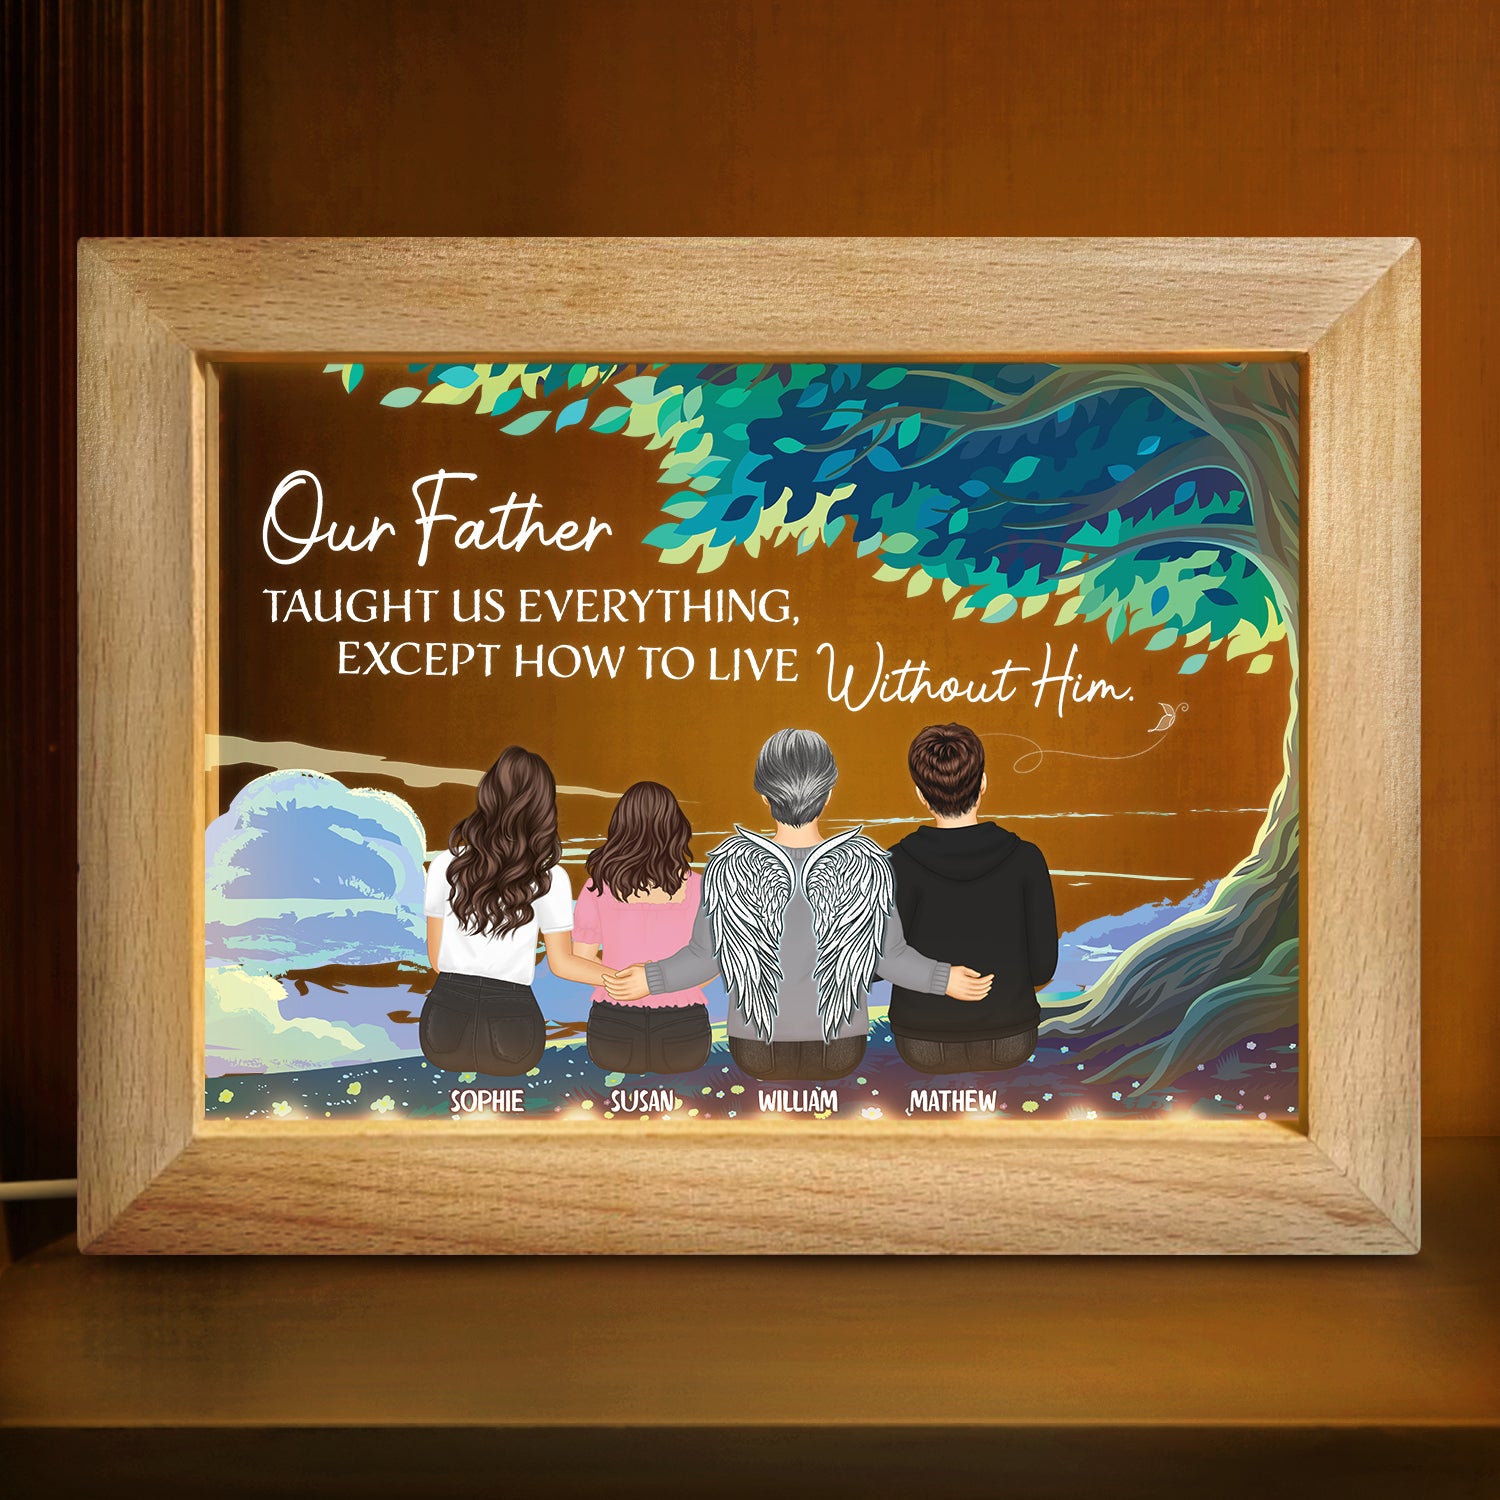 How To Live Without Him - Dad Memorial Gift - Personalized Horizontal Frame Lamp